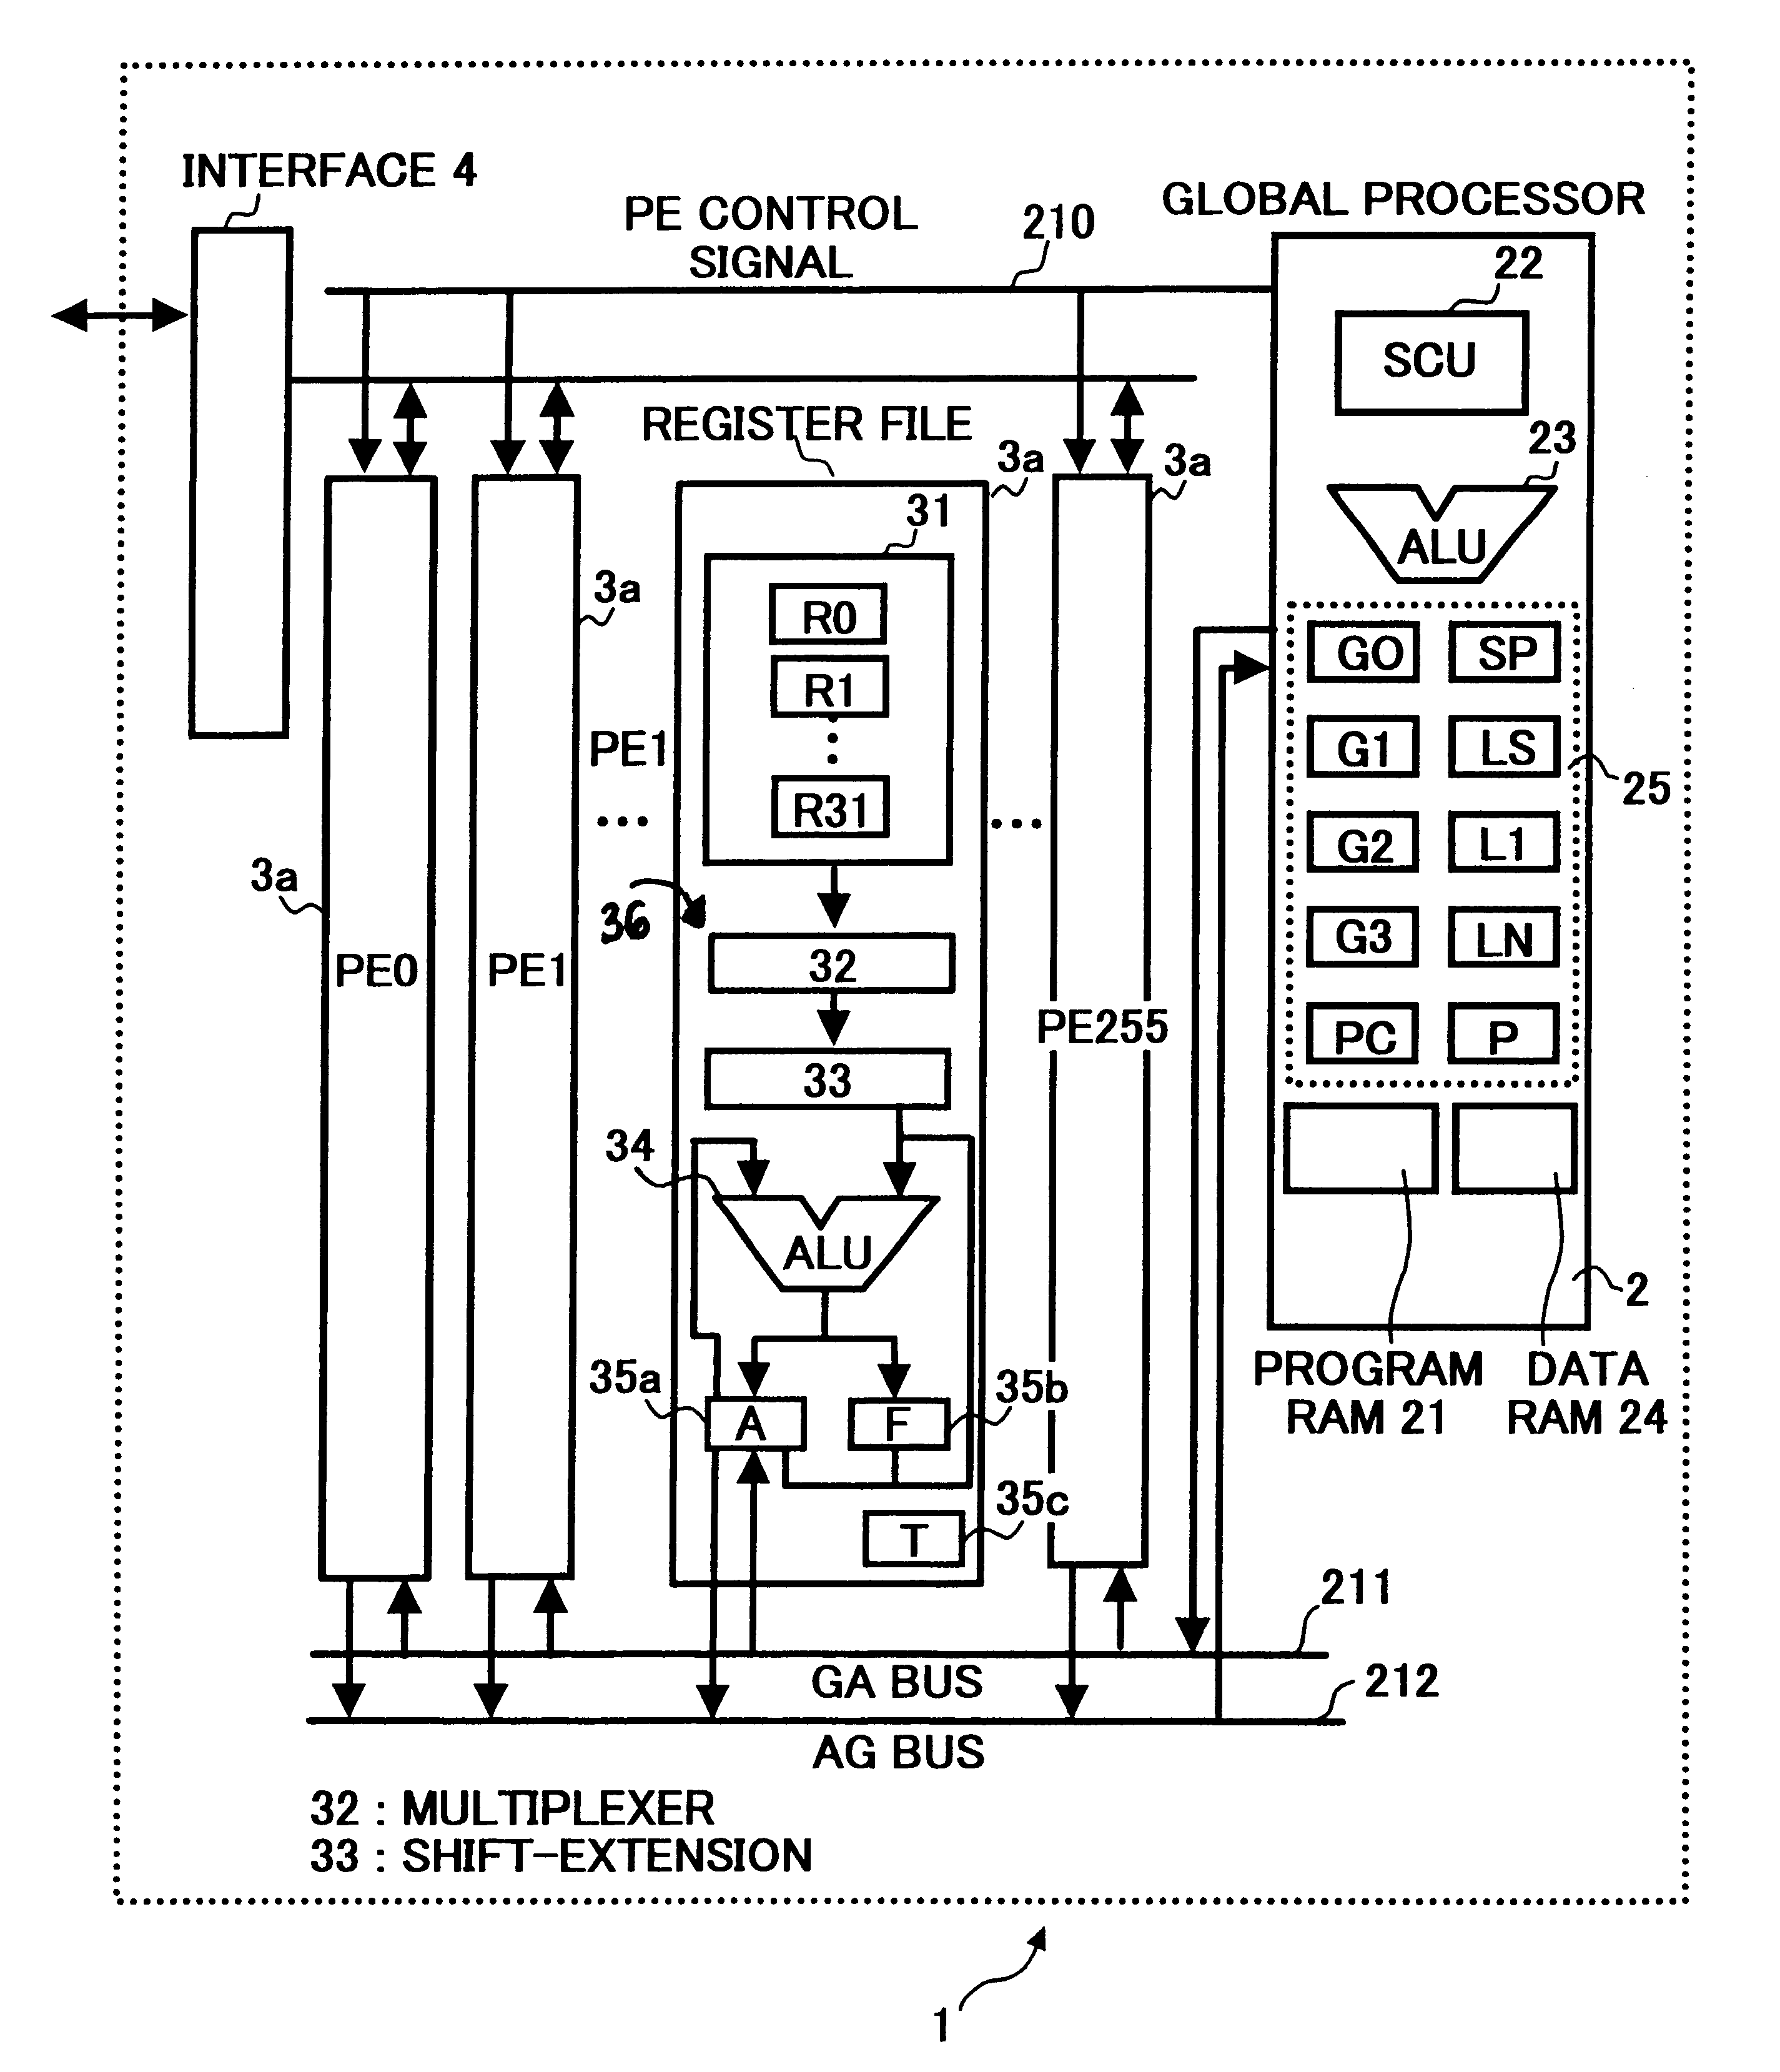 Parallel processor and image processing system for simultaneous processing of plural image data items without additional circuit delays and power increases